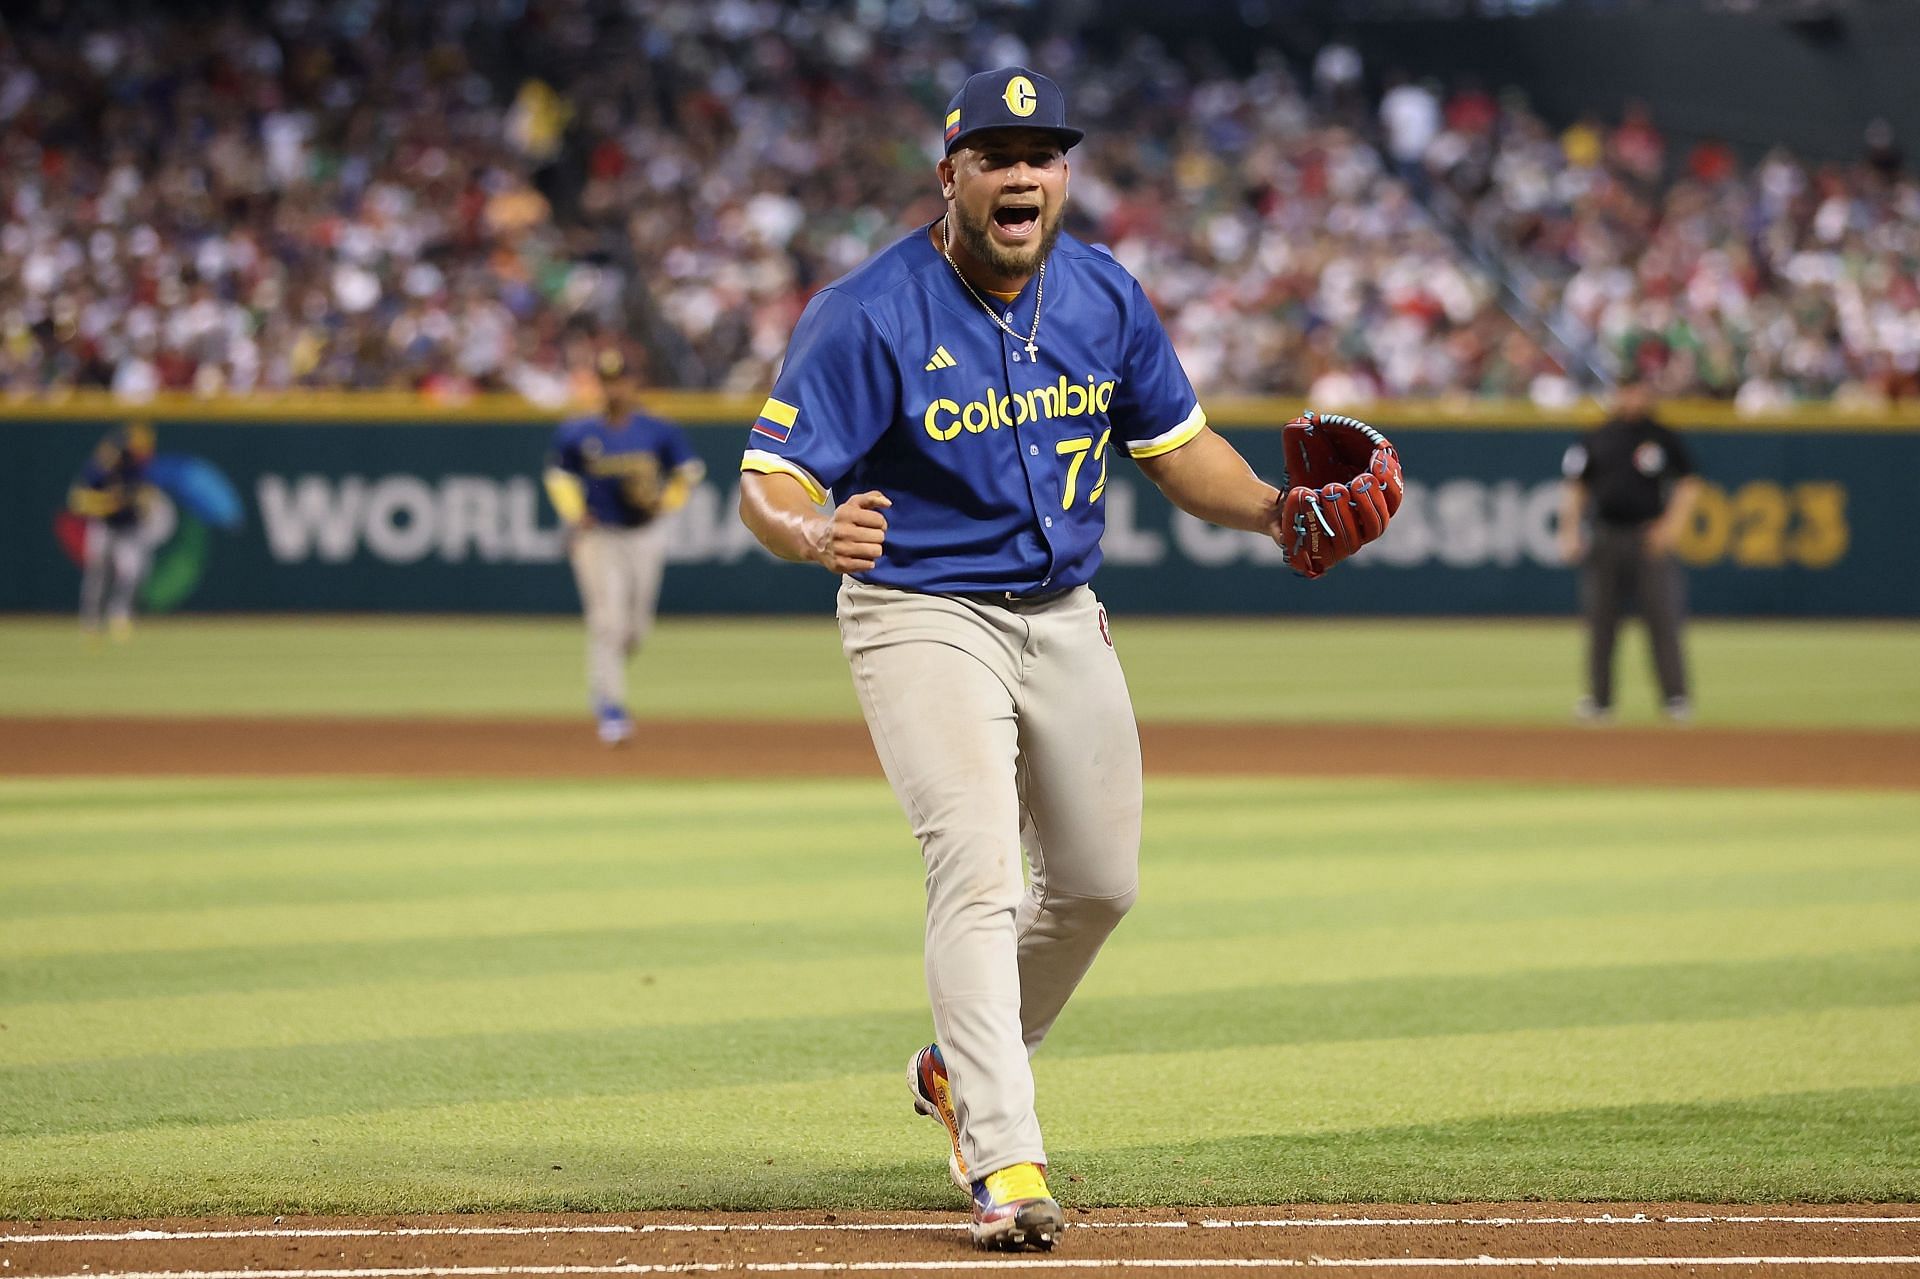 Relief pitcher Pedro Garcia #72 of Team Colombia reacts after pitching out of the eighth inning against Team Mexico